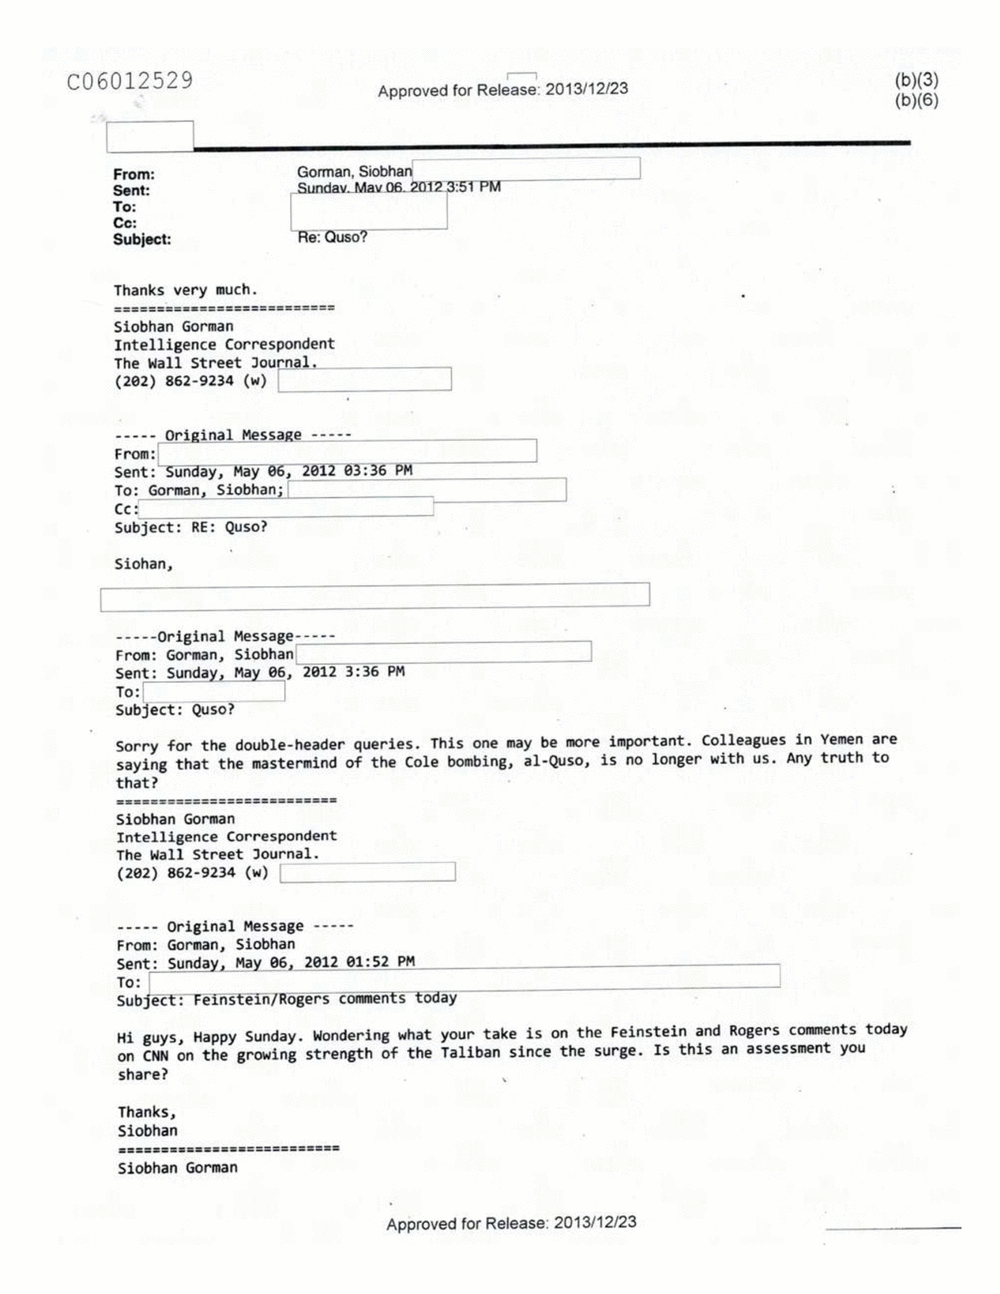 Page 57 from Email Correspondence Between Reporters and CIA Flacks